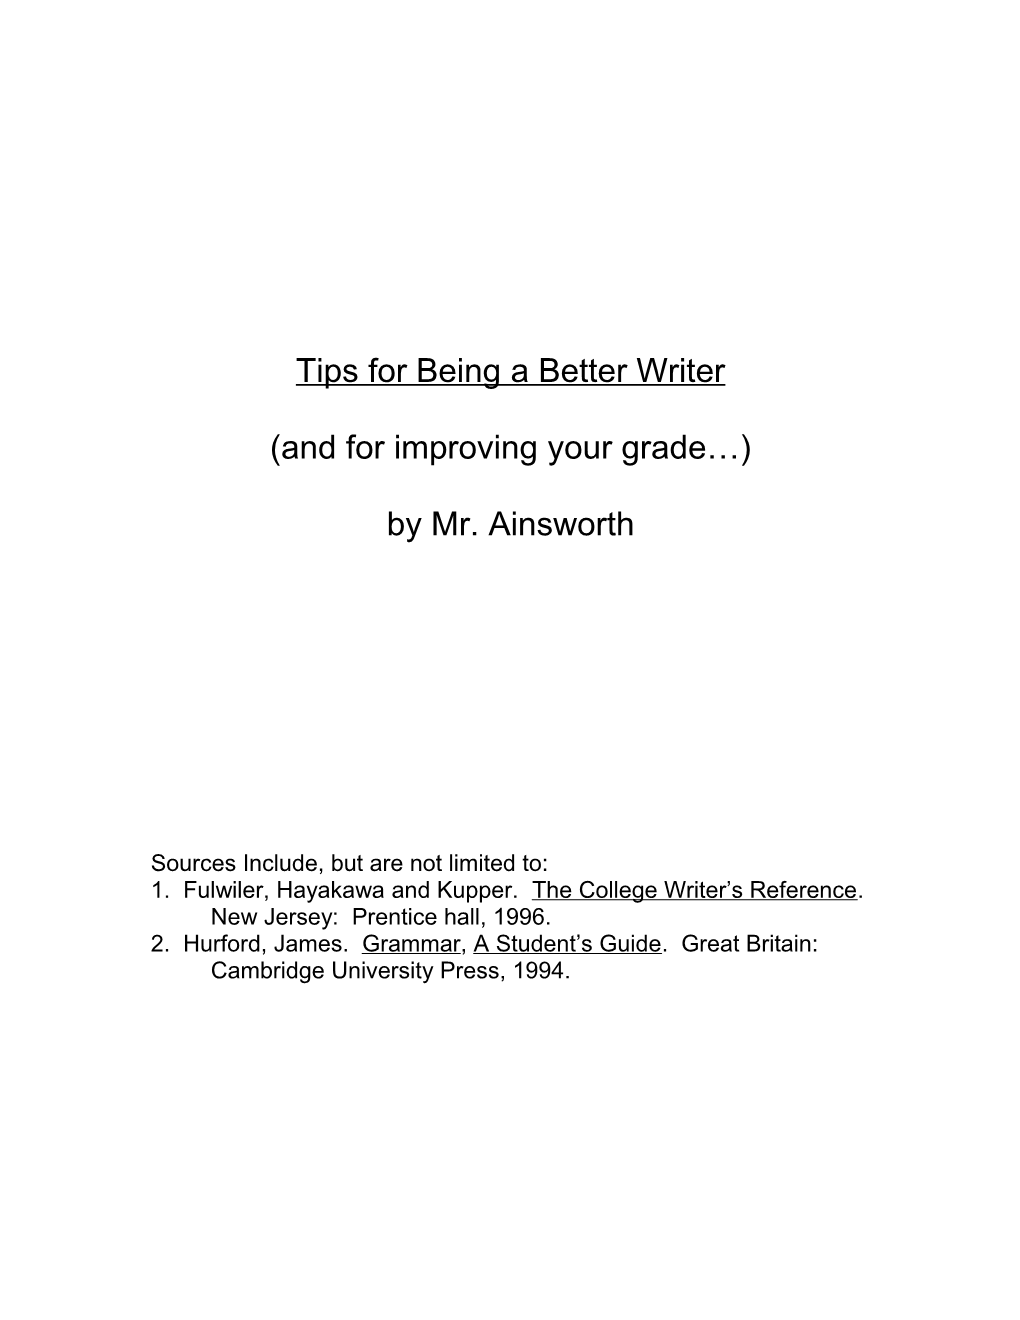 Tips for Being a Better Writer